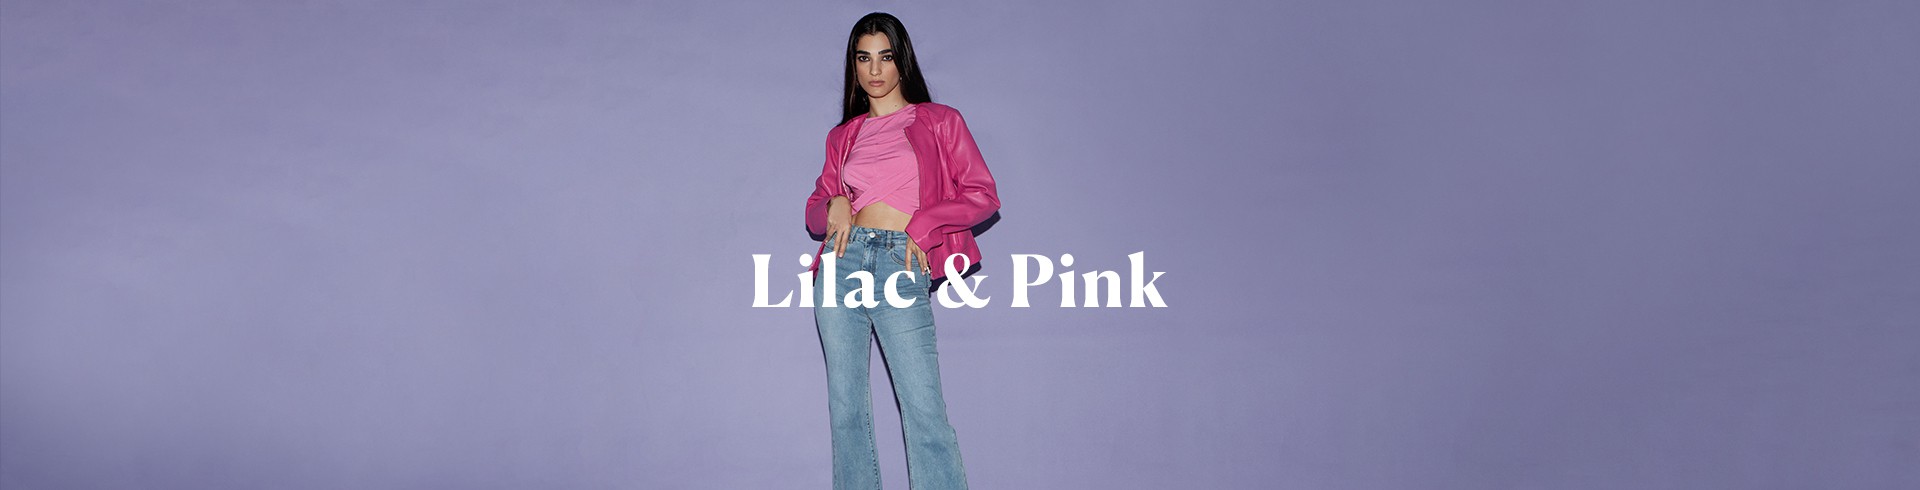 Lilac & Pink: 4 combinations for the ultimate look